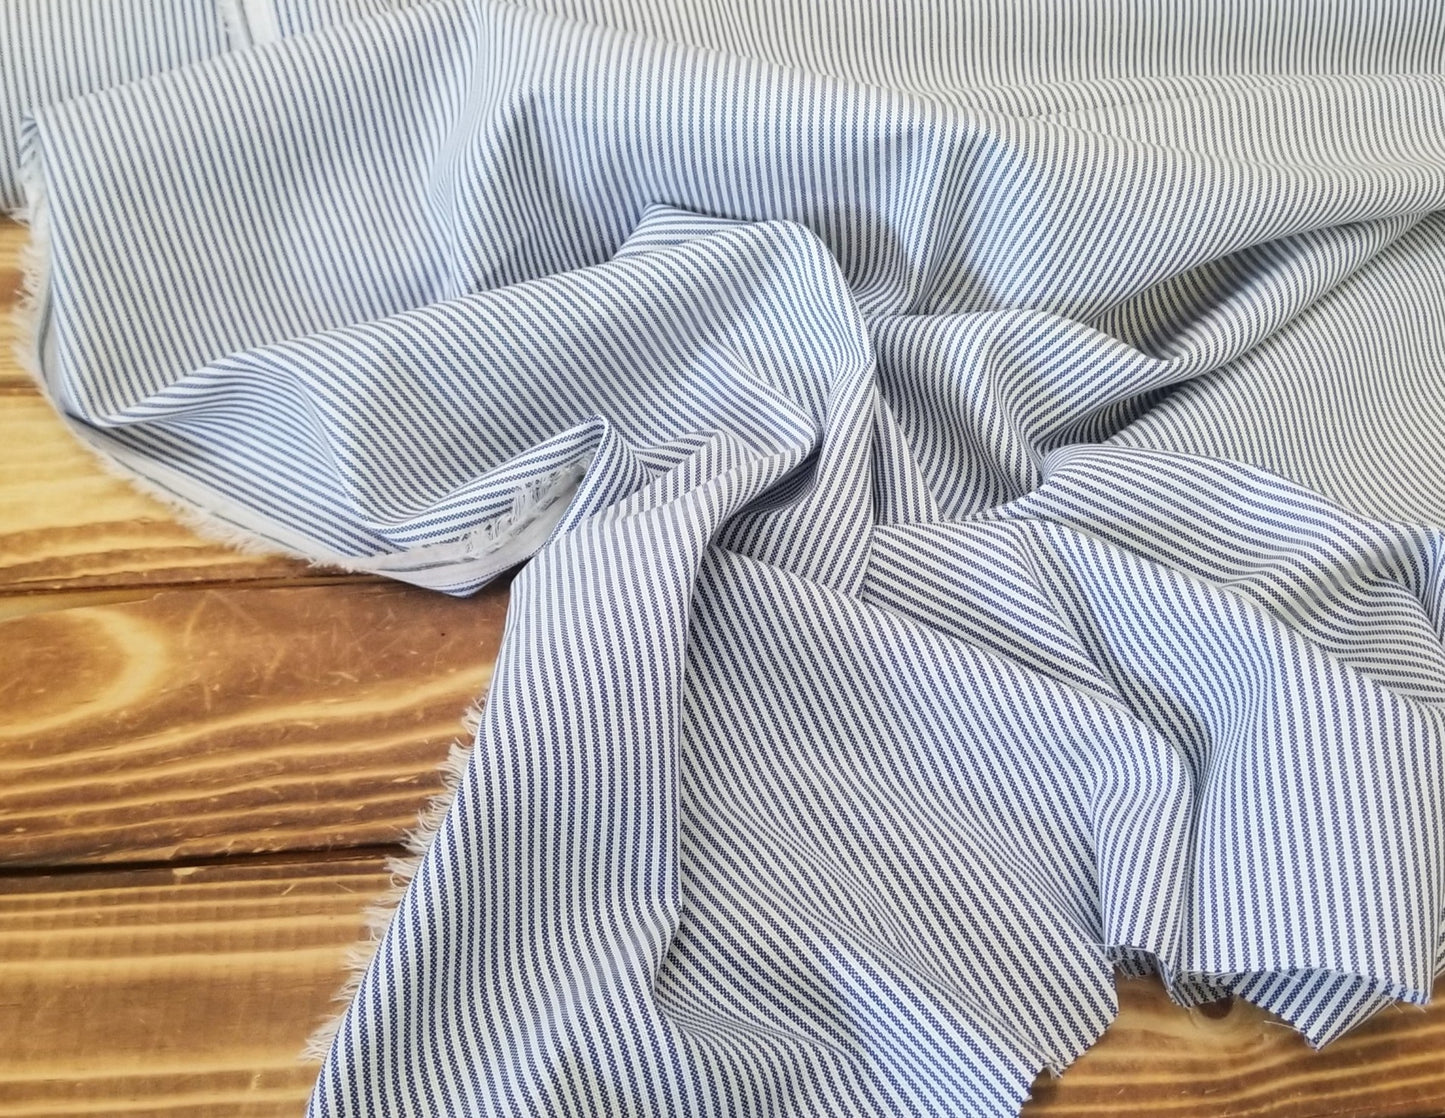 Designer Deadstock Cotton Shirting Vertical Micro Stripe Navy and White Woven- by the yard